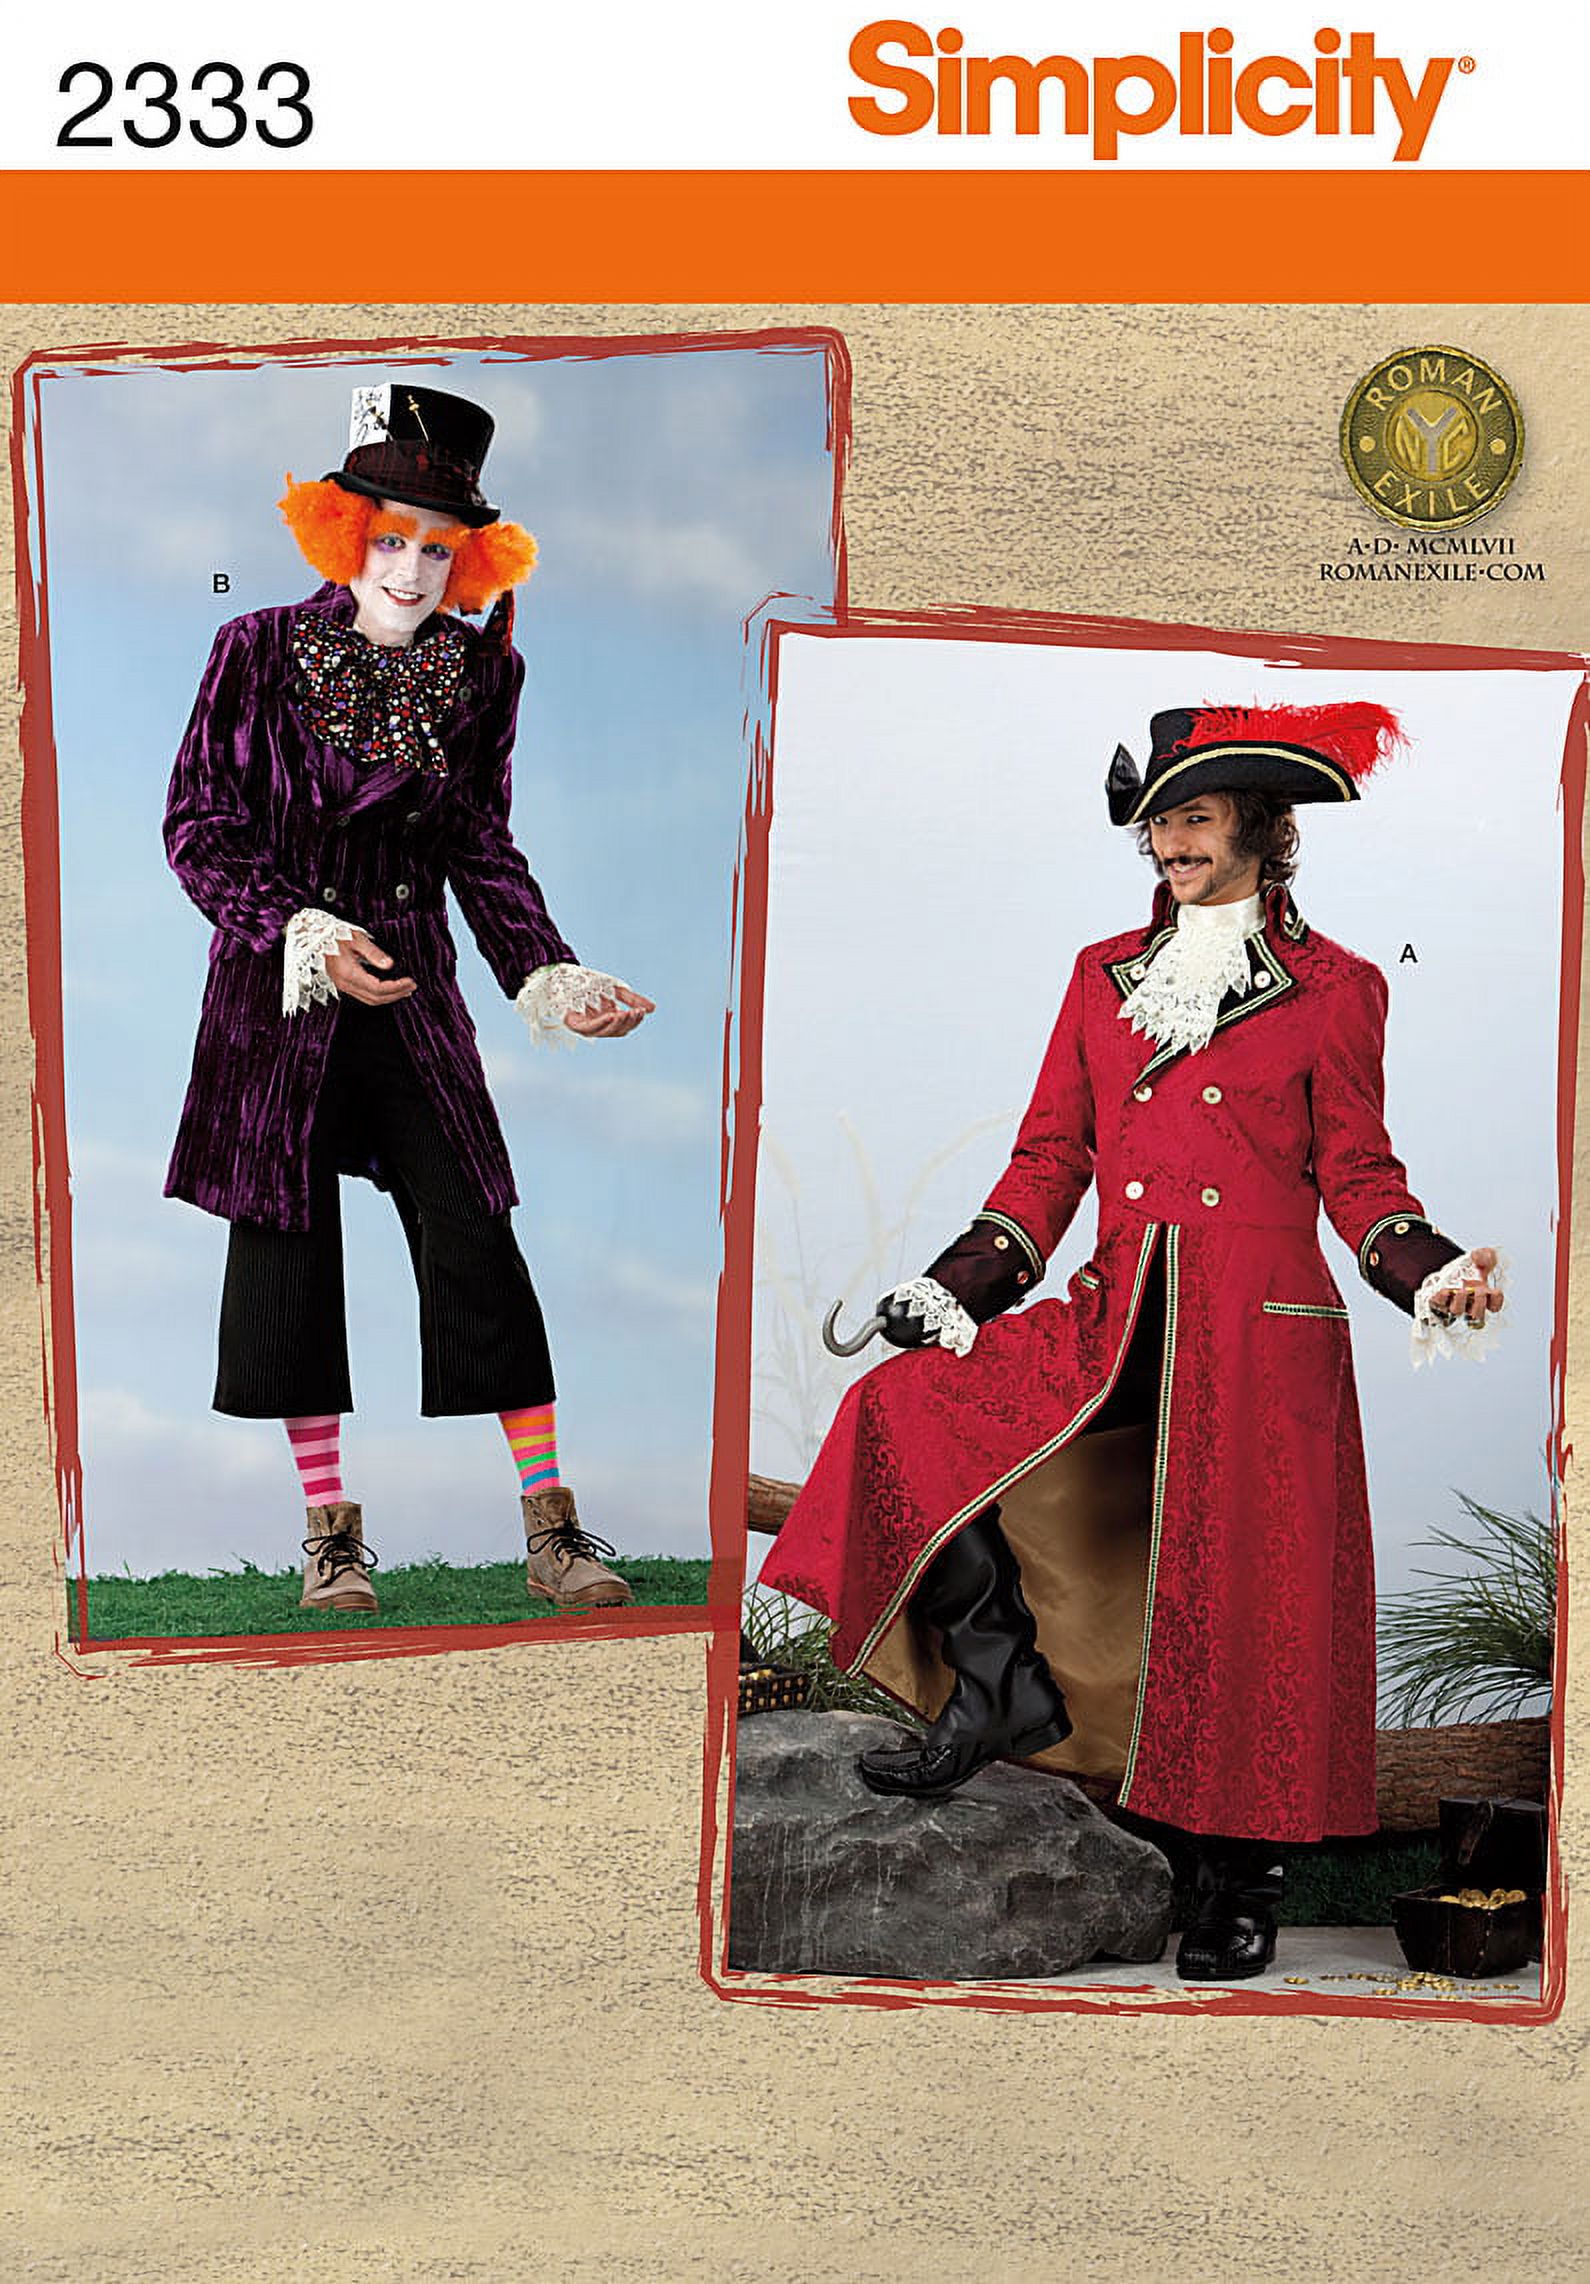 Simplicity Size S-M Mad Hatter, Roman Exile & Ship's Captain Costumes Pattern, 1 Each - image 1 of 2